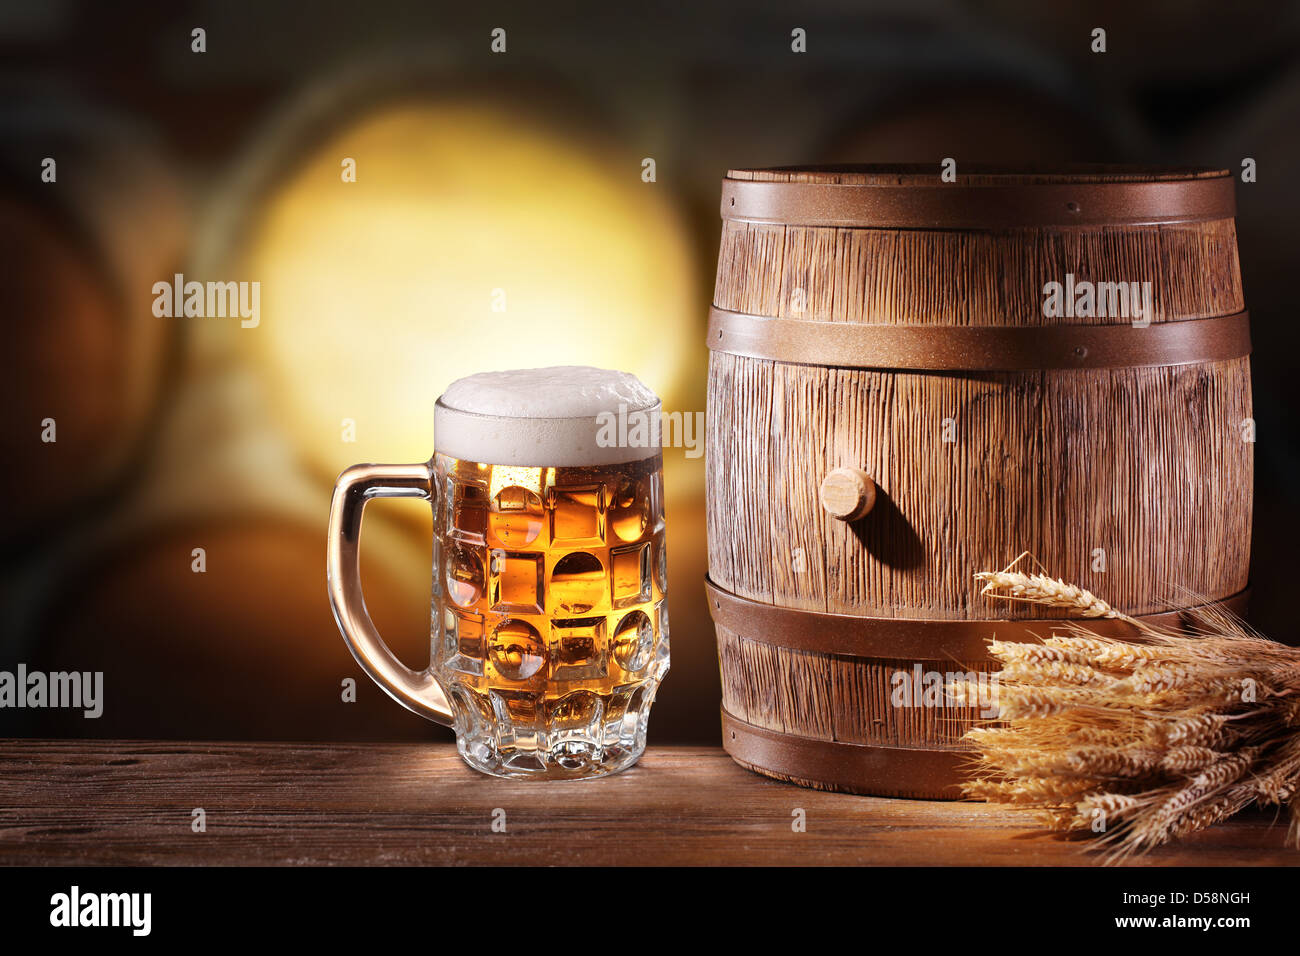 Beer glasses with a wooden barrel. Background - dark yellow gradient. Stock Photo